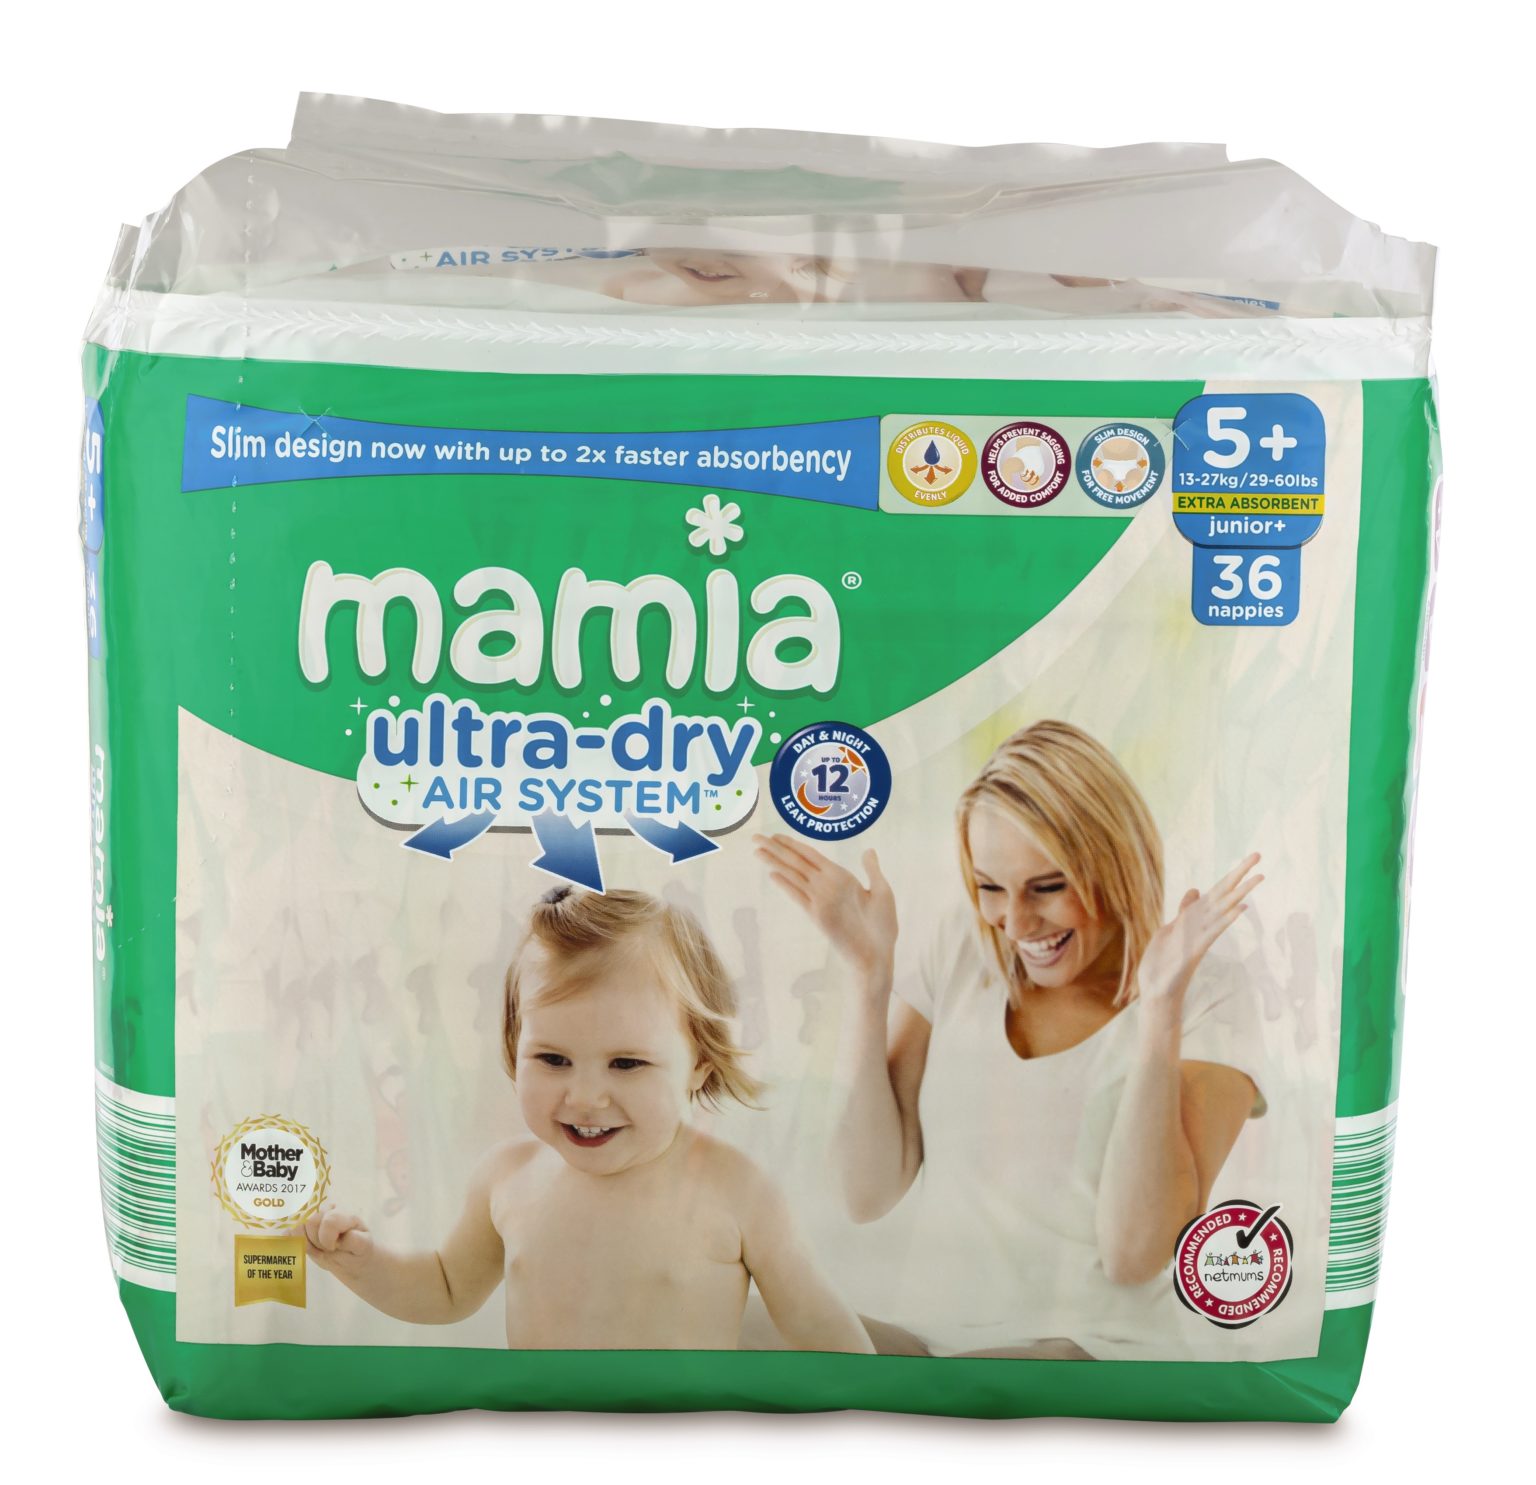 ALDI'S AWARDWINNING MAMIA NAPPIES (SIZE 5+) DROPS TO ONLY €2.29 (36